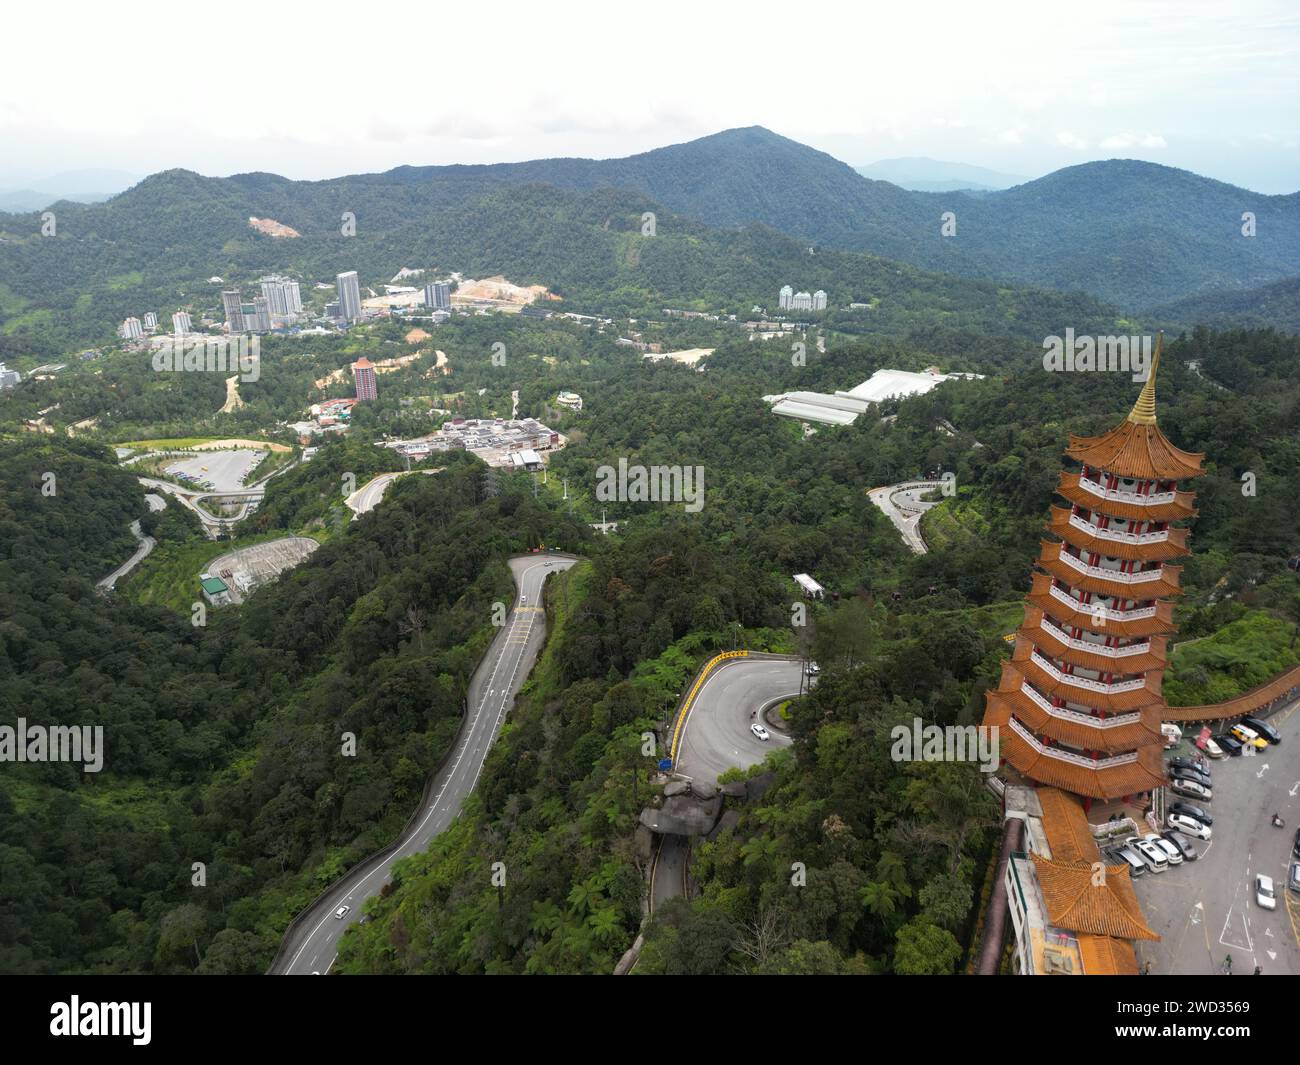 An aerial view of the Chin Swee Temple in the Genting Highlands area of Malaysia Stock Photo